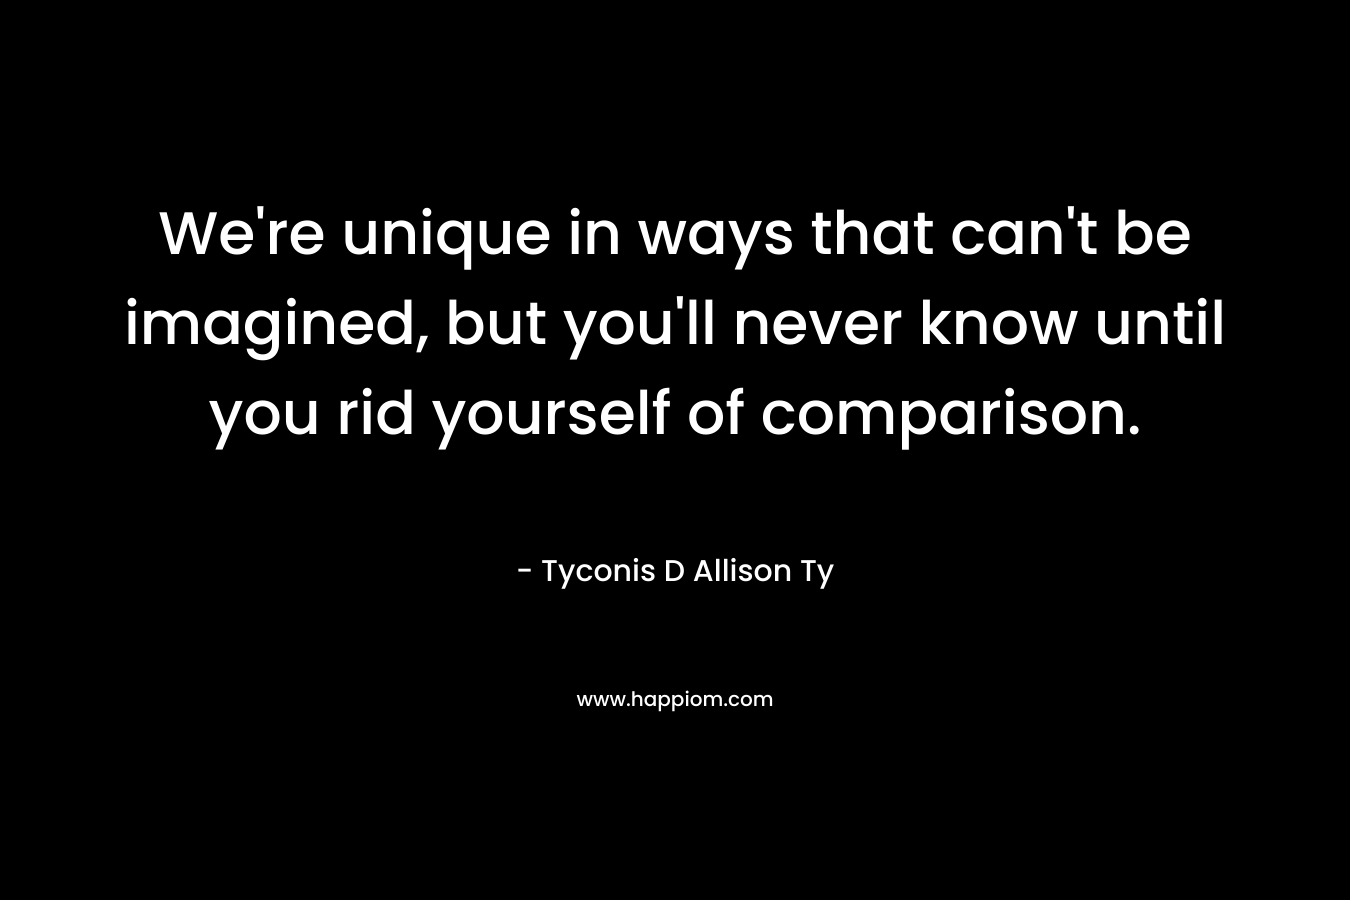 We’re unique in ways that can’t be imagined, but you’ll never know until you rid yourself of comparison. – Tyconis D Allison Ty